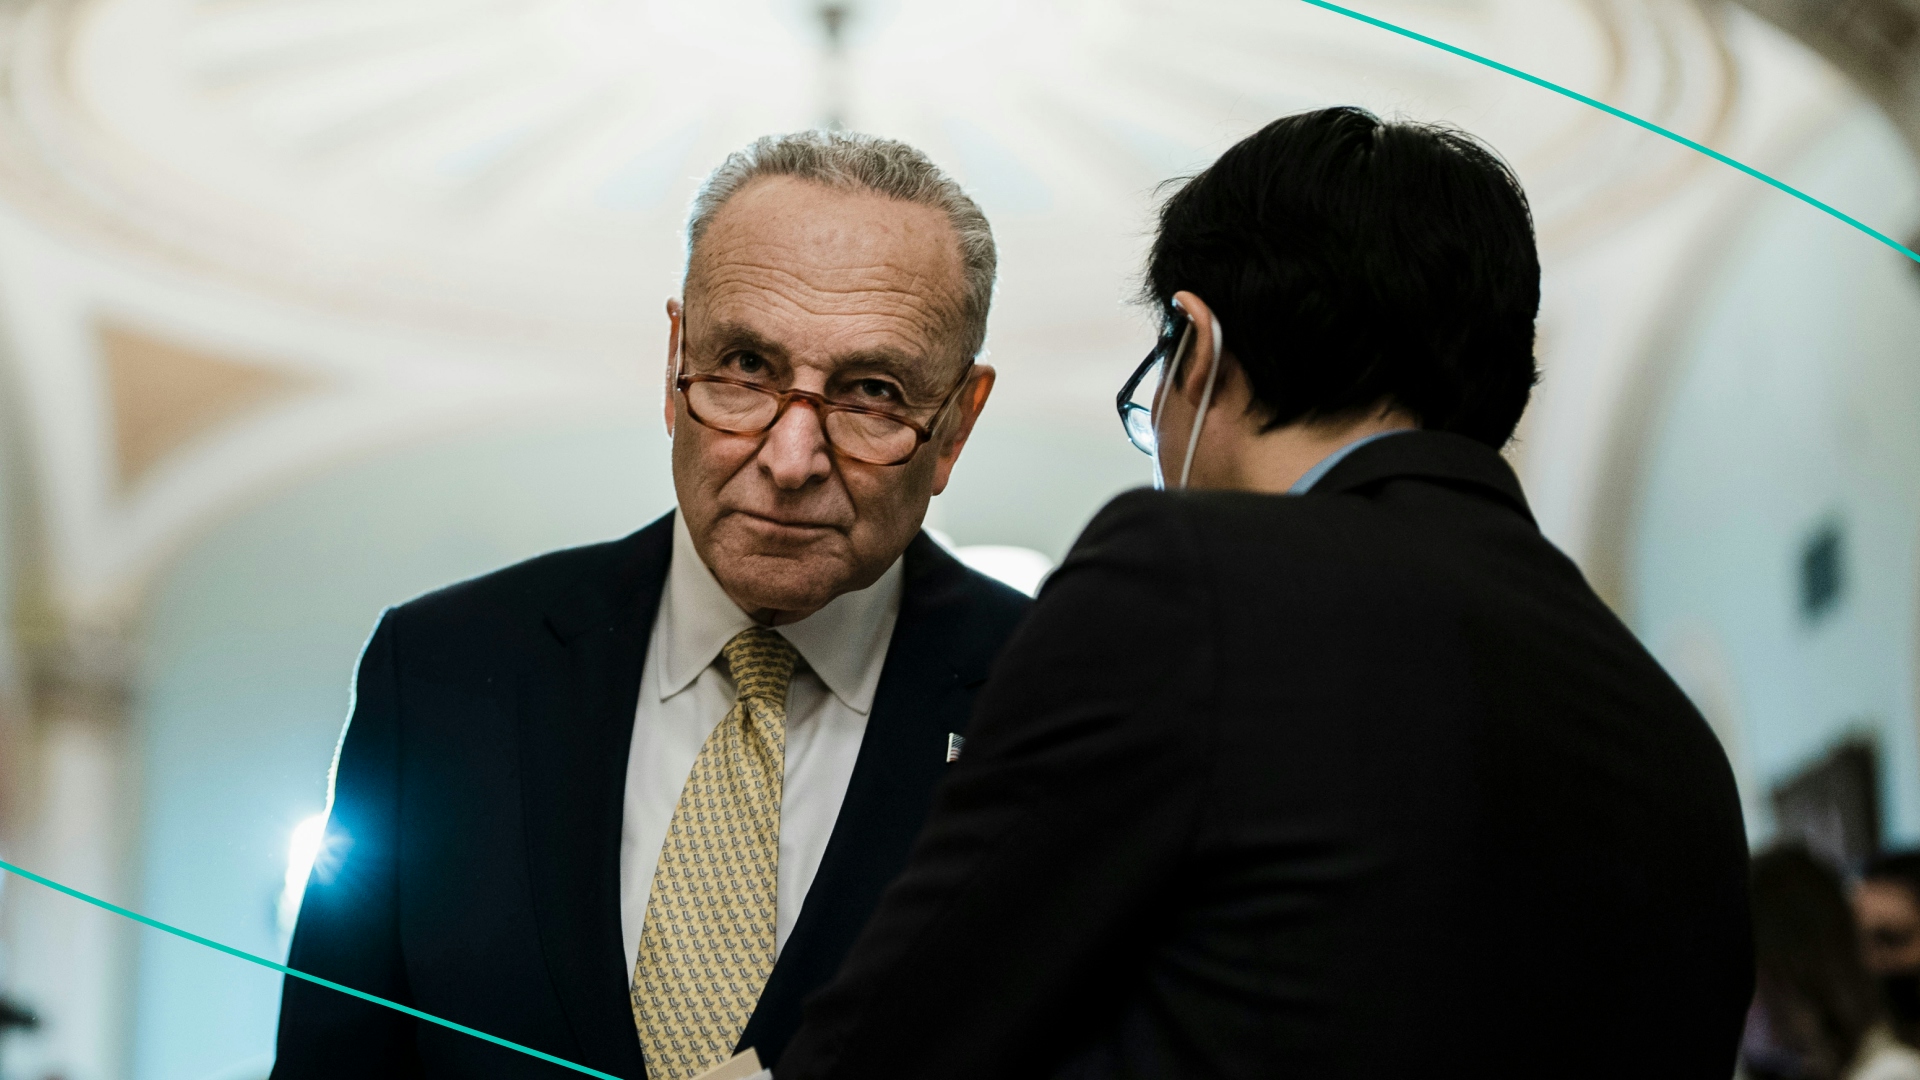 Senate Majority Leader Chuck Schumer (D-NY) speaks with an aide in Washington, DC. 